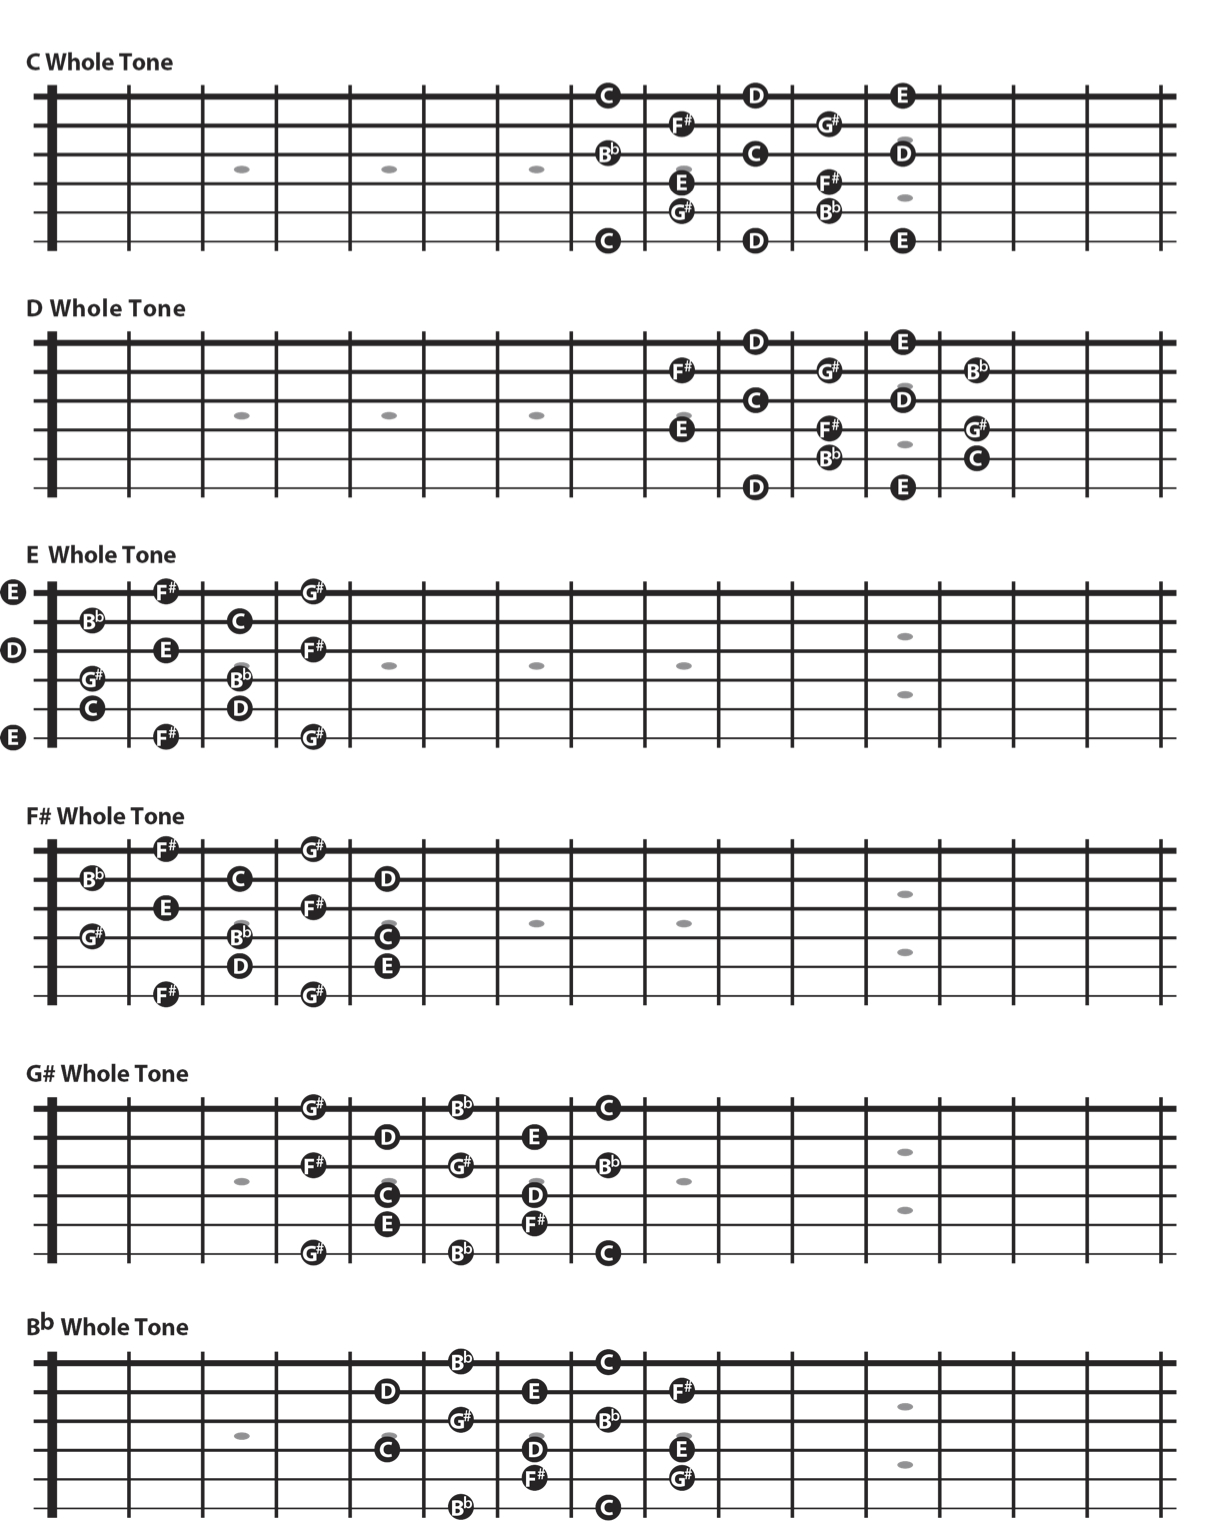 The whole tone scale in-position fingerings on guitar